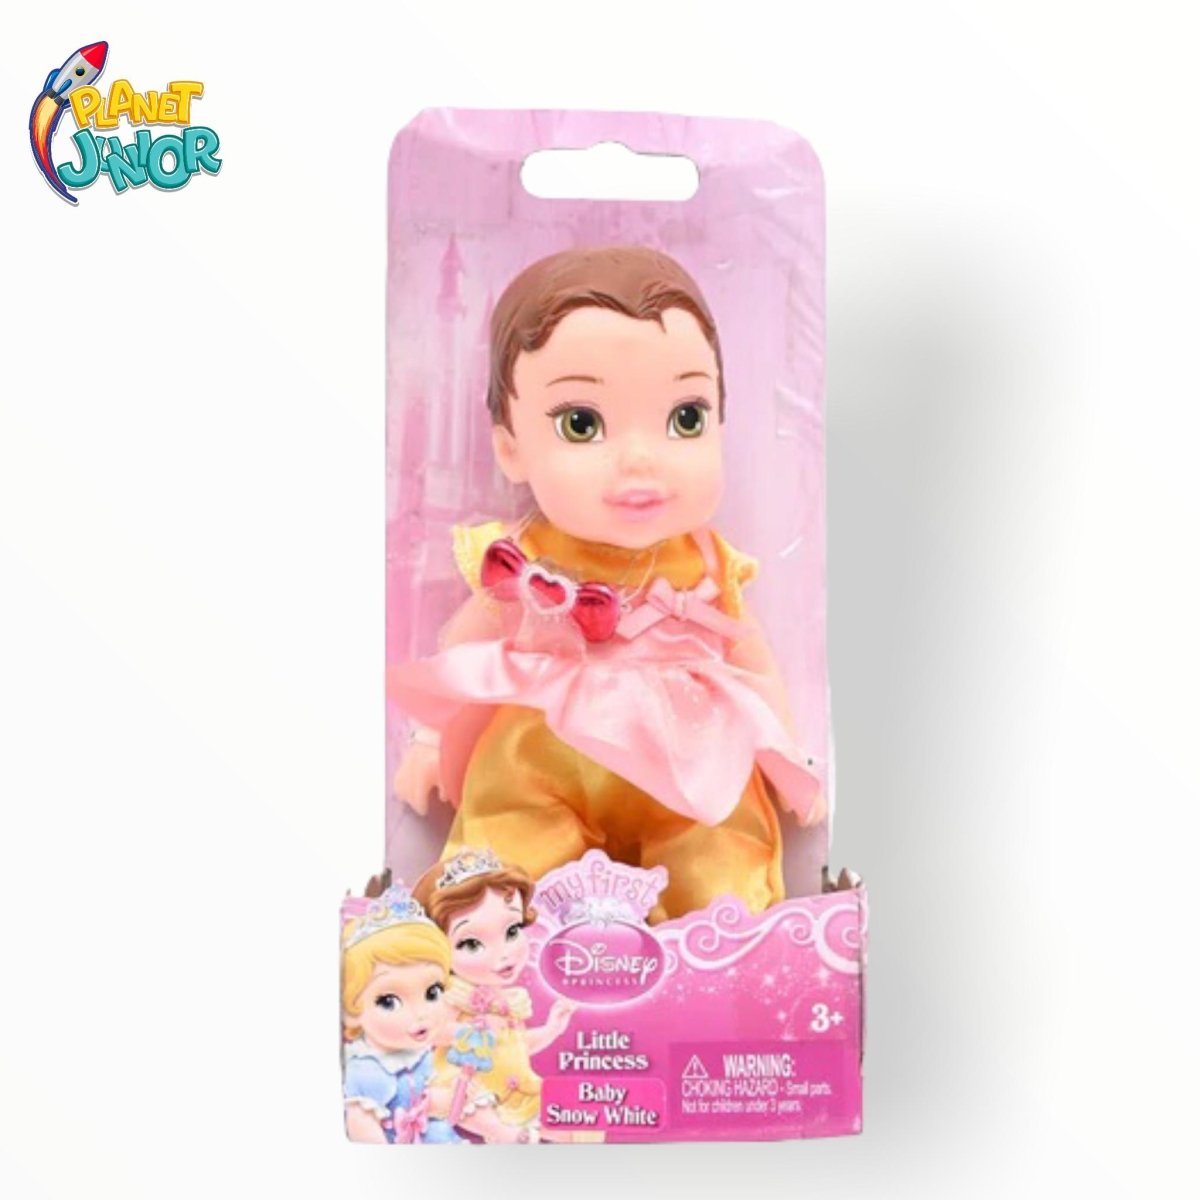 Disney Little Princess Baby Dolls - Assorted Collection - 75809 - Planet Junior